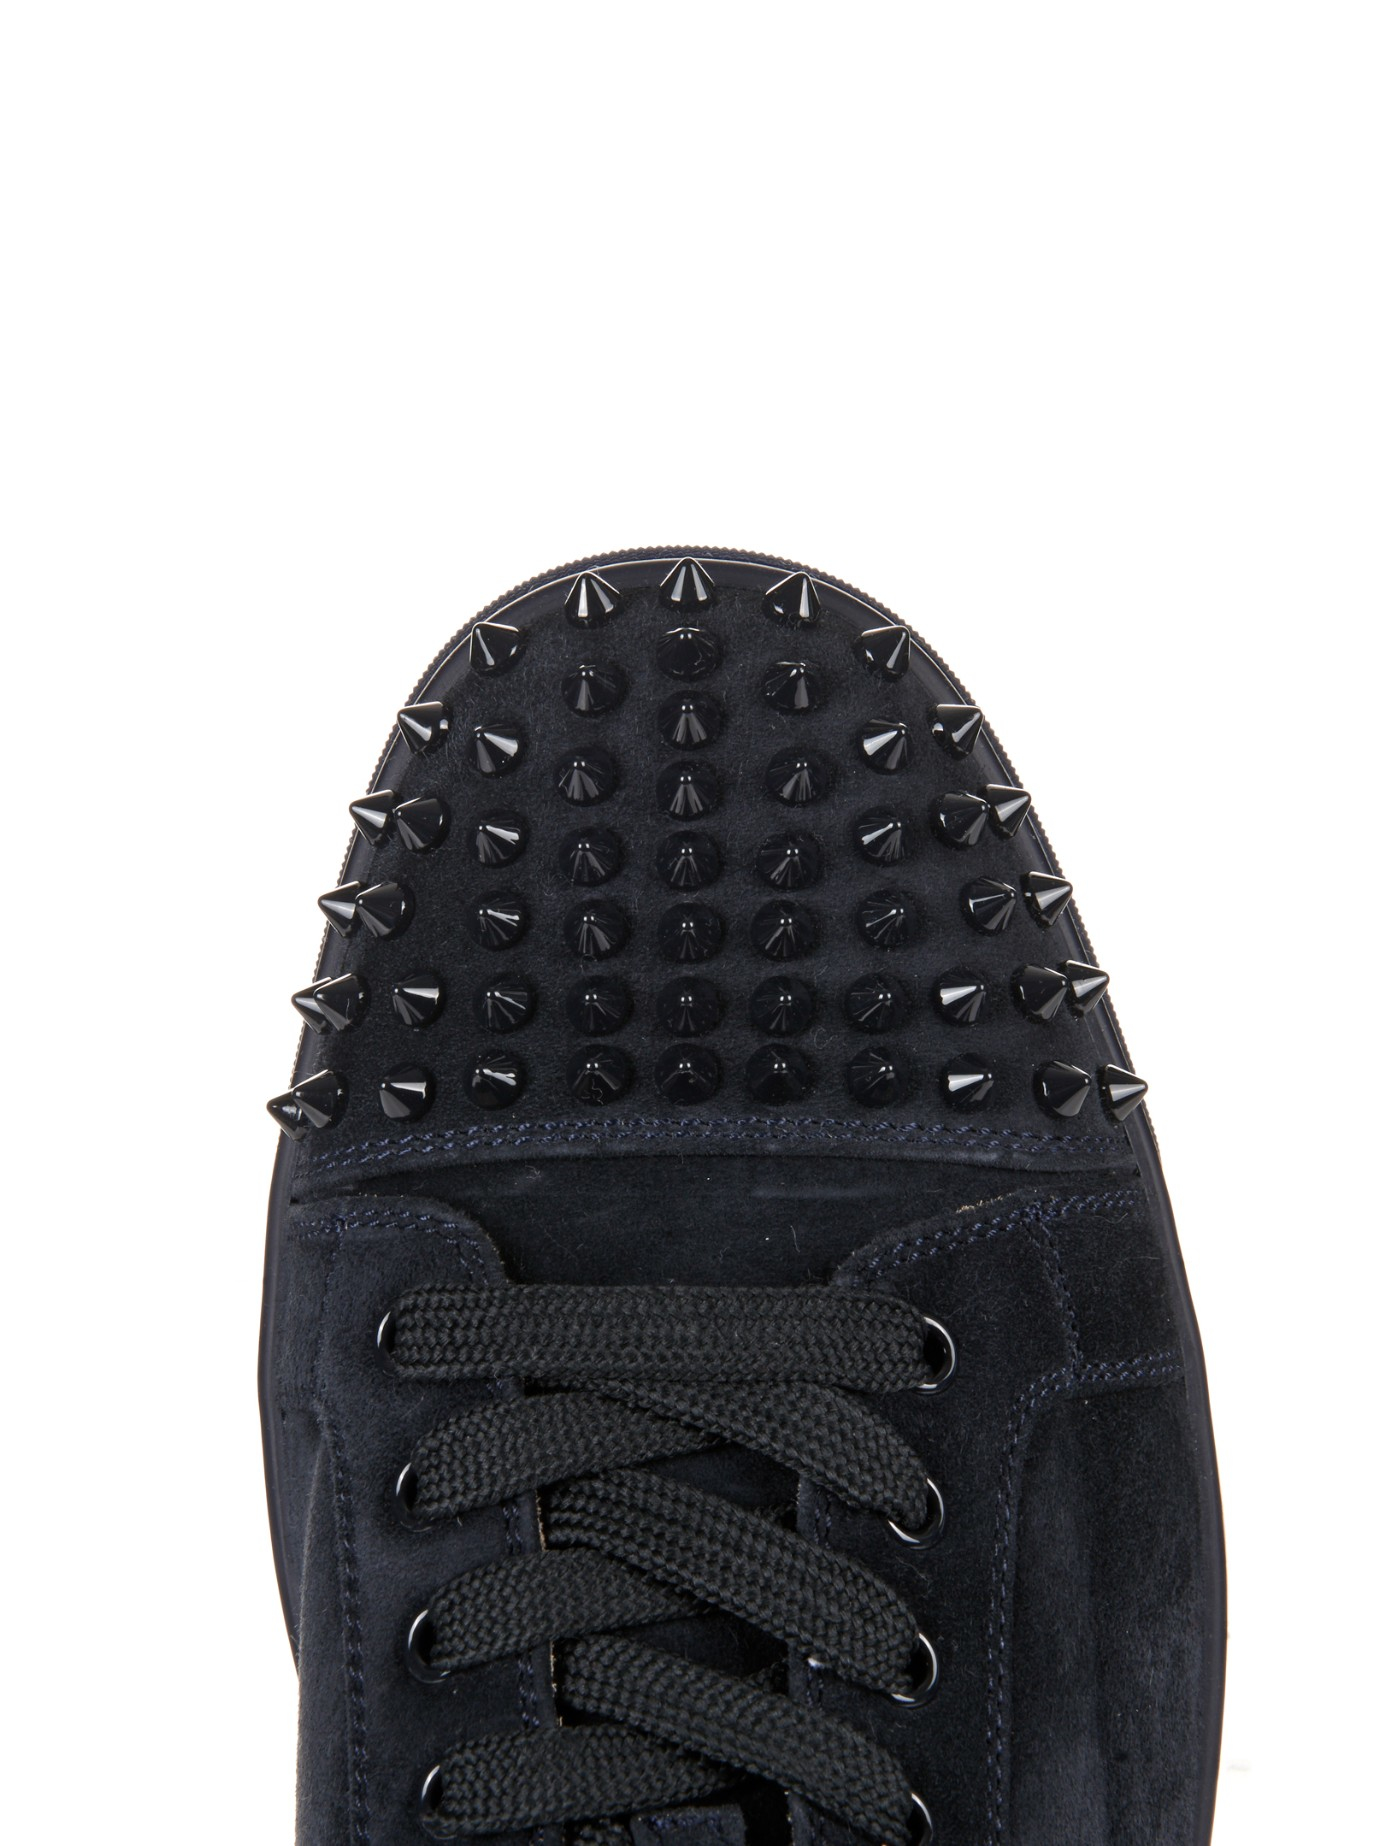 Louis Suede Sneakers in Blue - Christian Louboutin